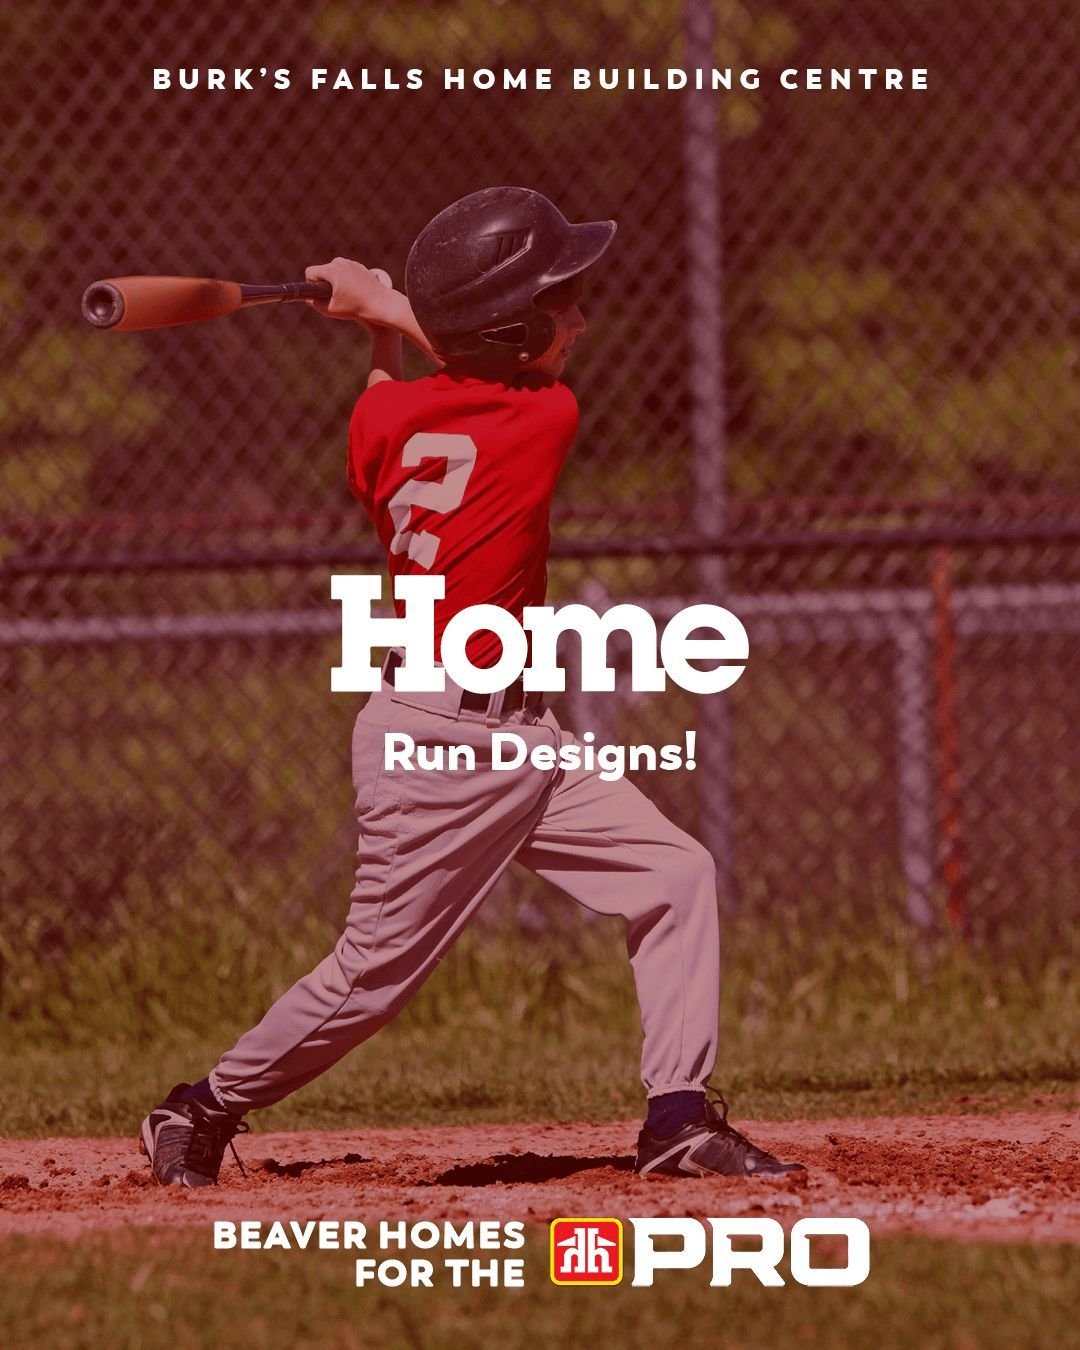 Hit a style HOME run with Beaver Homes and Cottages! ⚾️

Connect with our Beaver Homes and Cottages expert, Kevin DiGiacomo, to streamline your projects, dodge any curveballs like materials delays, and supply you with pre-finished blueprints and engi